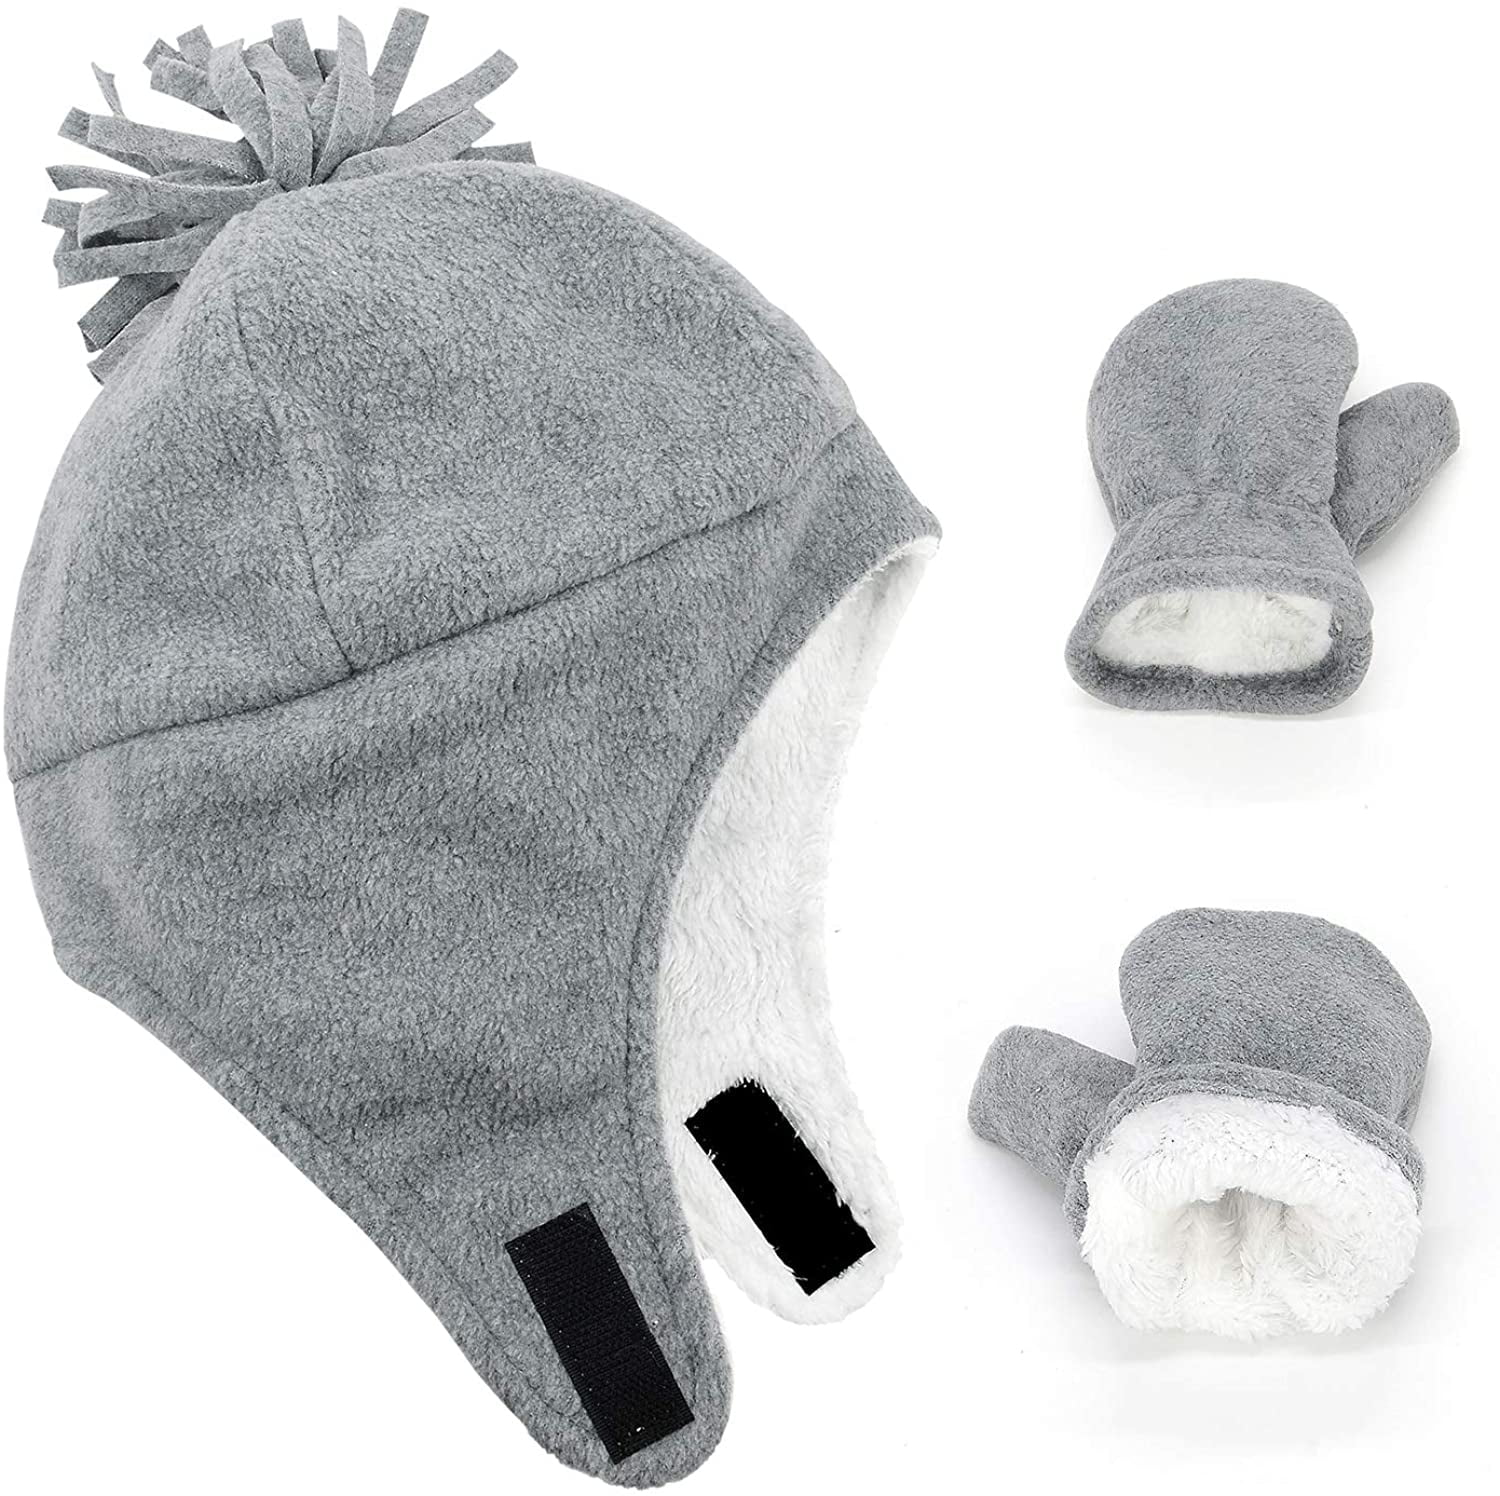 3 Pieces Baby Kids Winter Hat Sherpa Lined Hat Warm Fleece Hat with Ear Flaps for Girls Boys